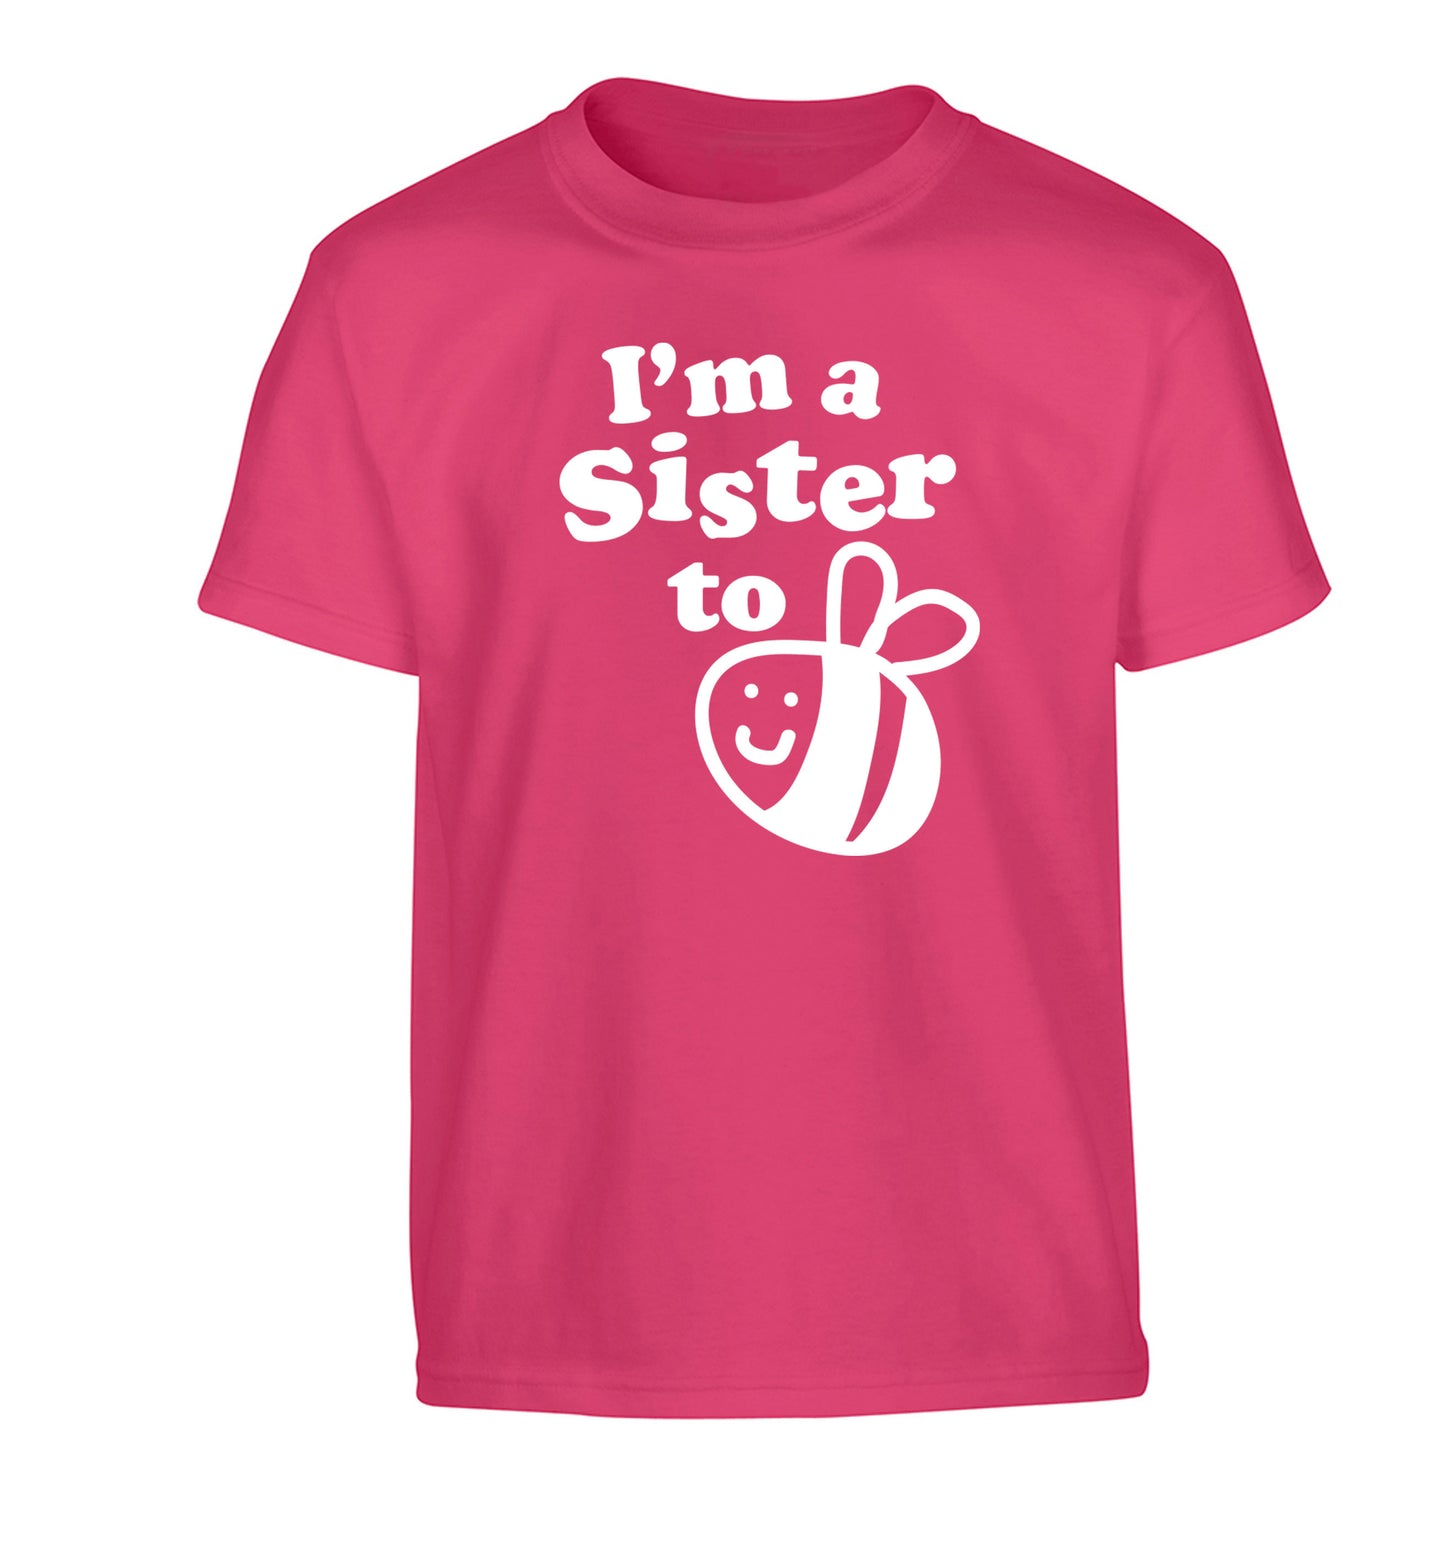 I'm a sister to be Children's pink Tshirt 12-14 Years